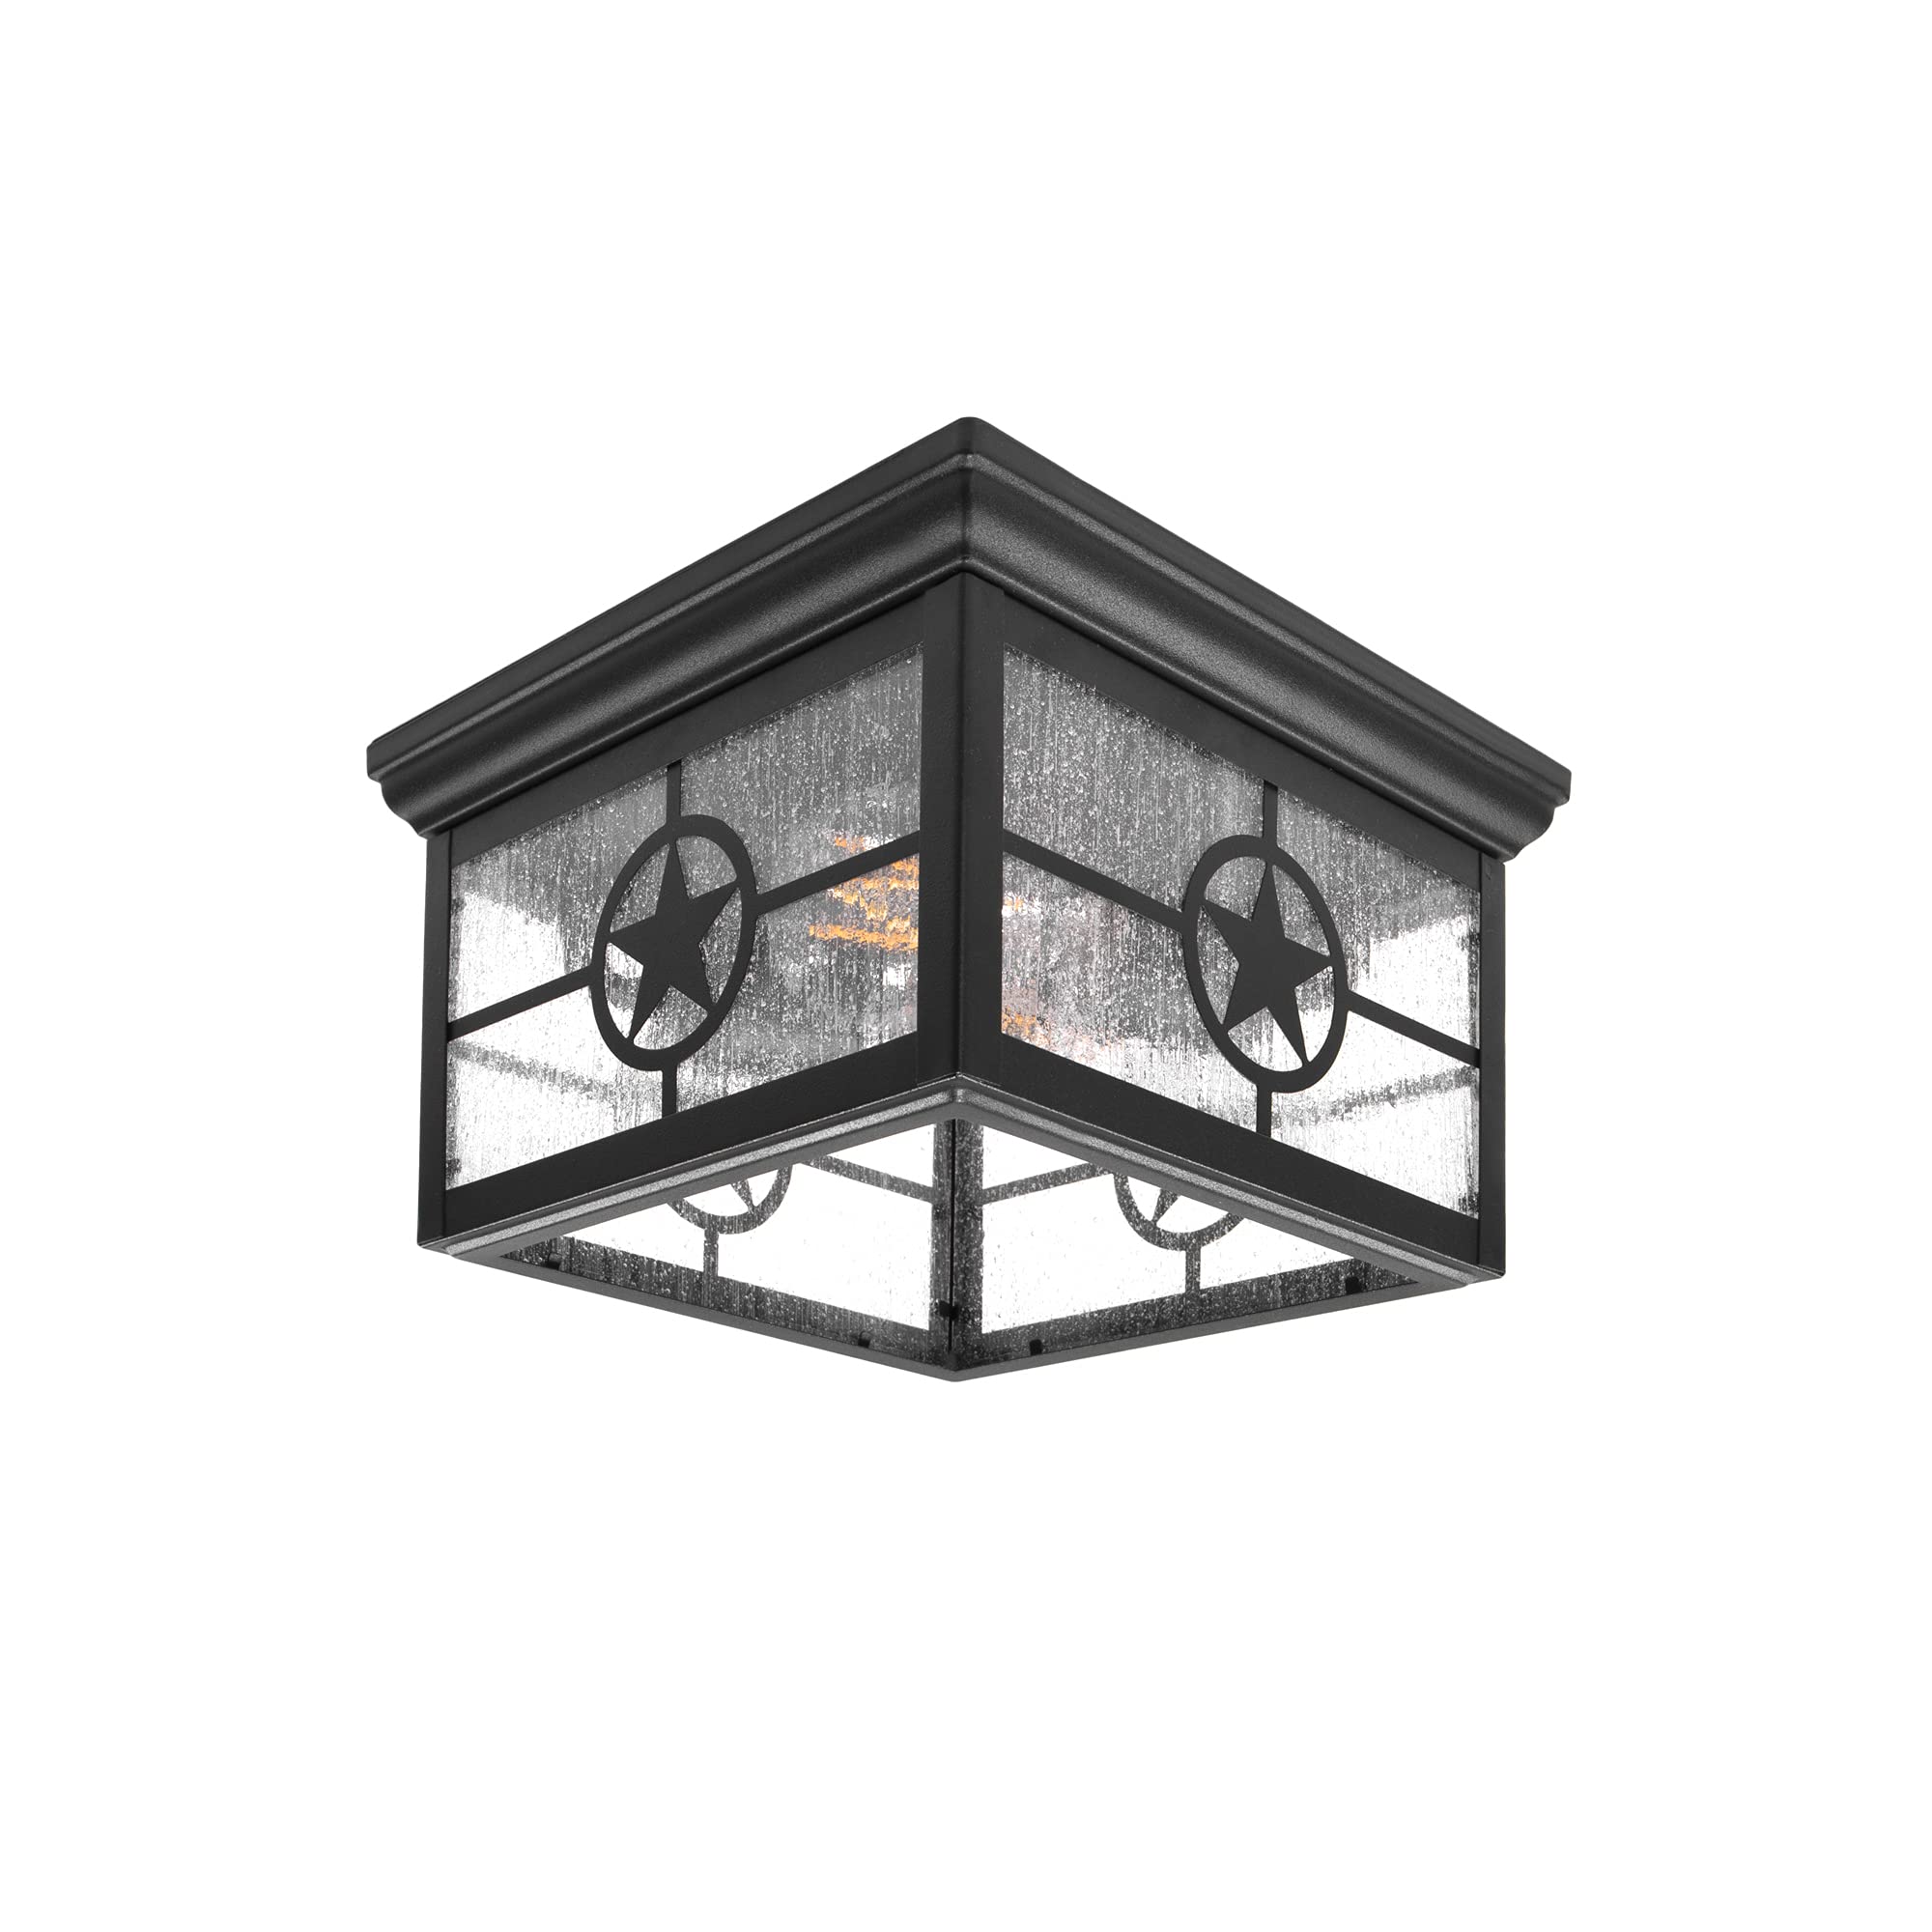 CORAMDEO Country Star Square Light Ceiling Mount Farmhouse Fixture,  Indoor or Outdoor, Two Standard Sockets, Open Bottom, Damp Location, Black  Powder Coat Finish with Seedy Glass (OC0031S-E26-BLK)